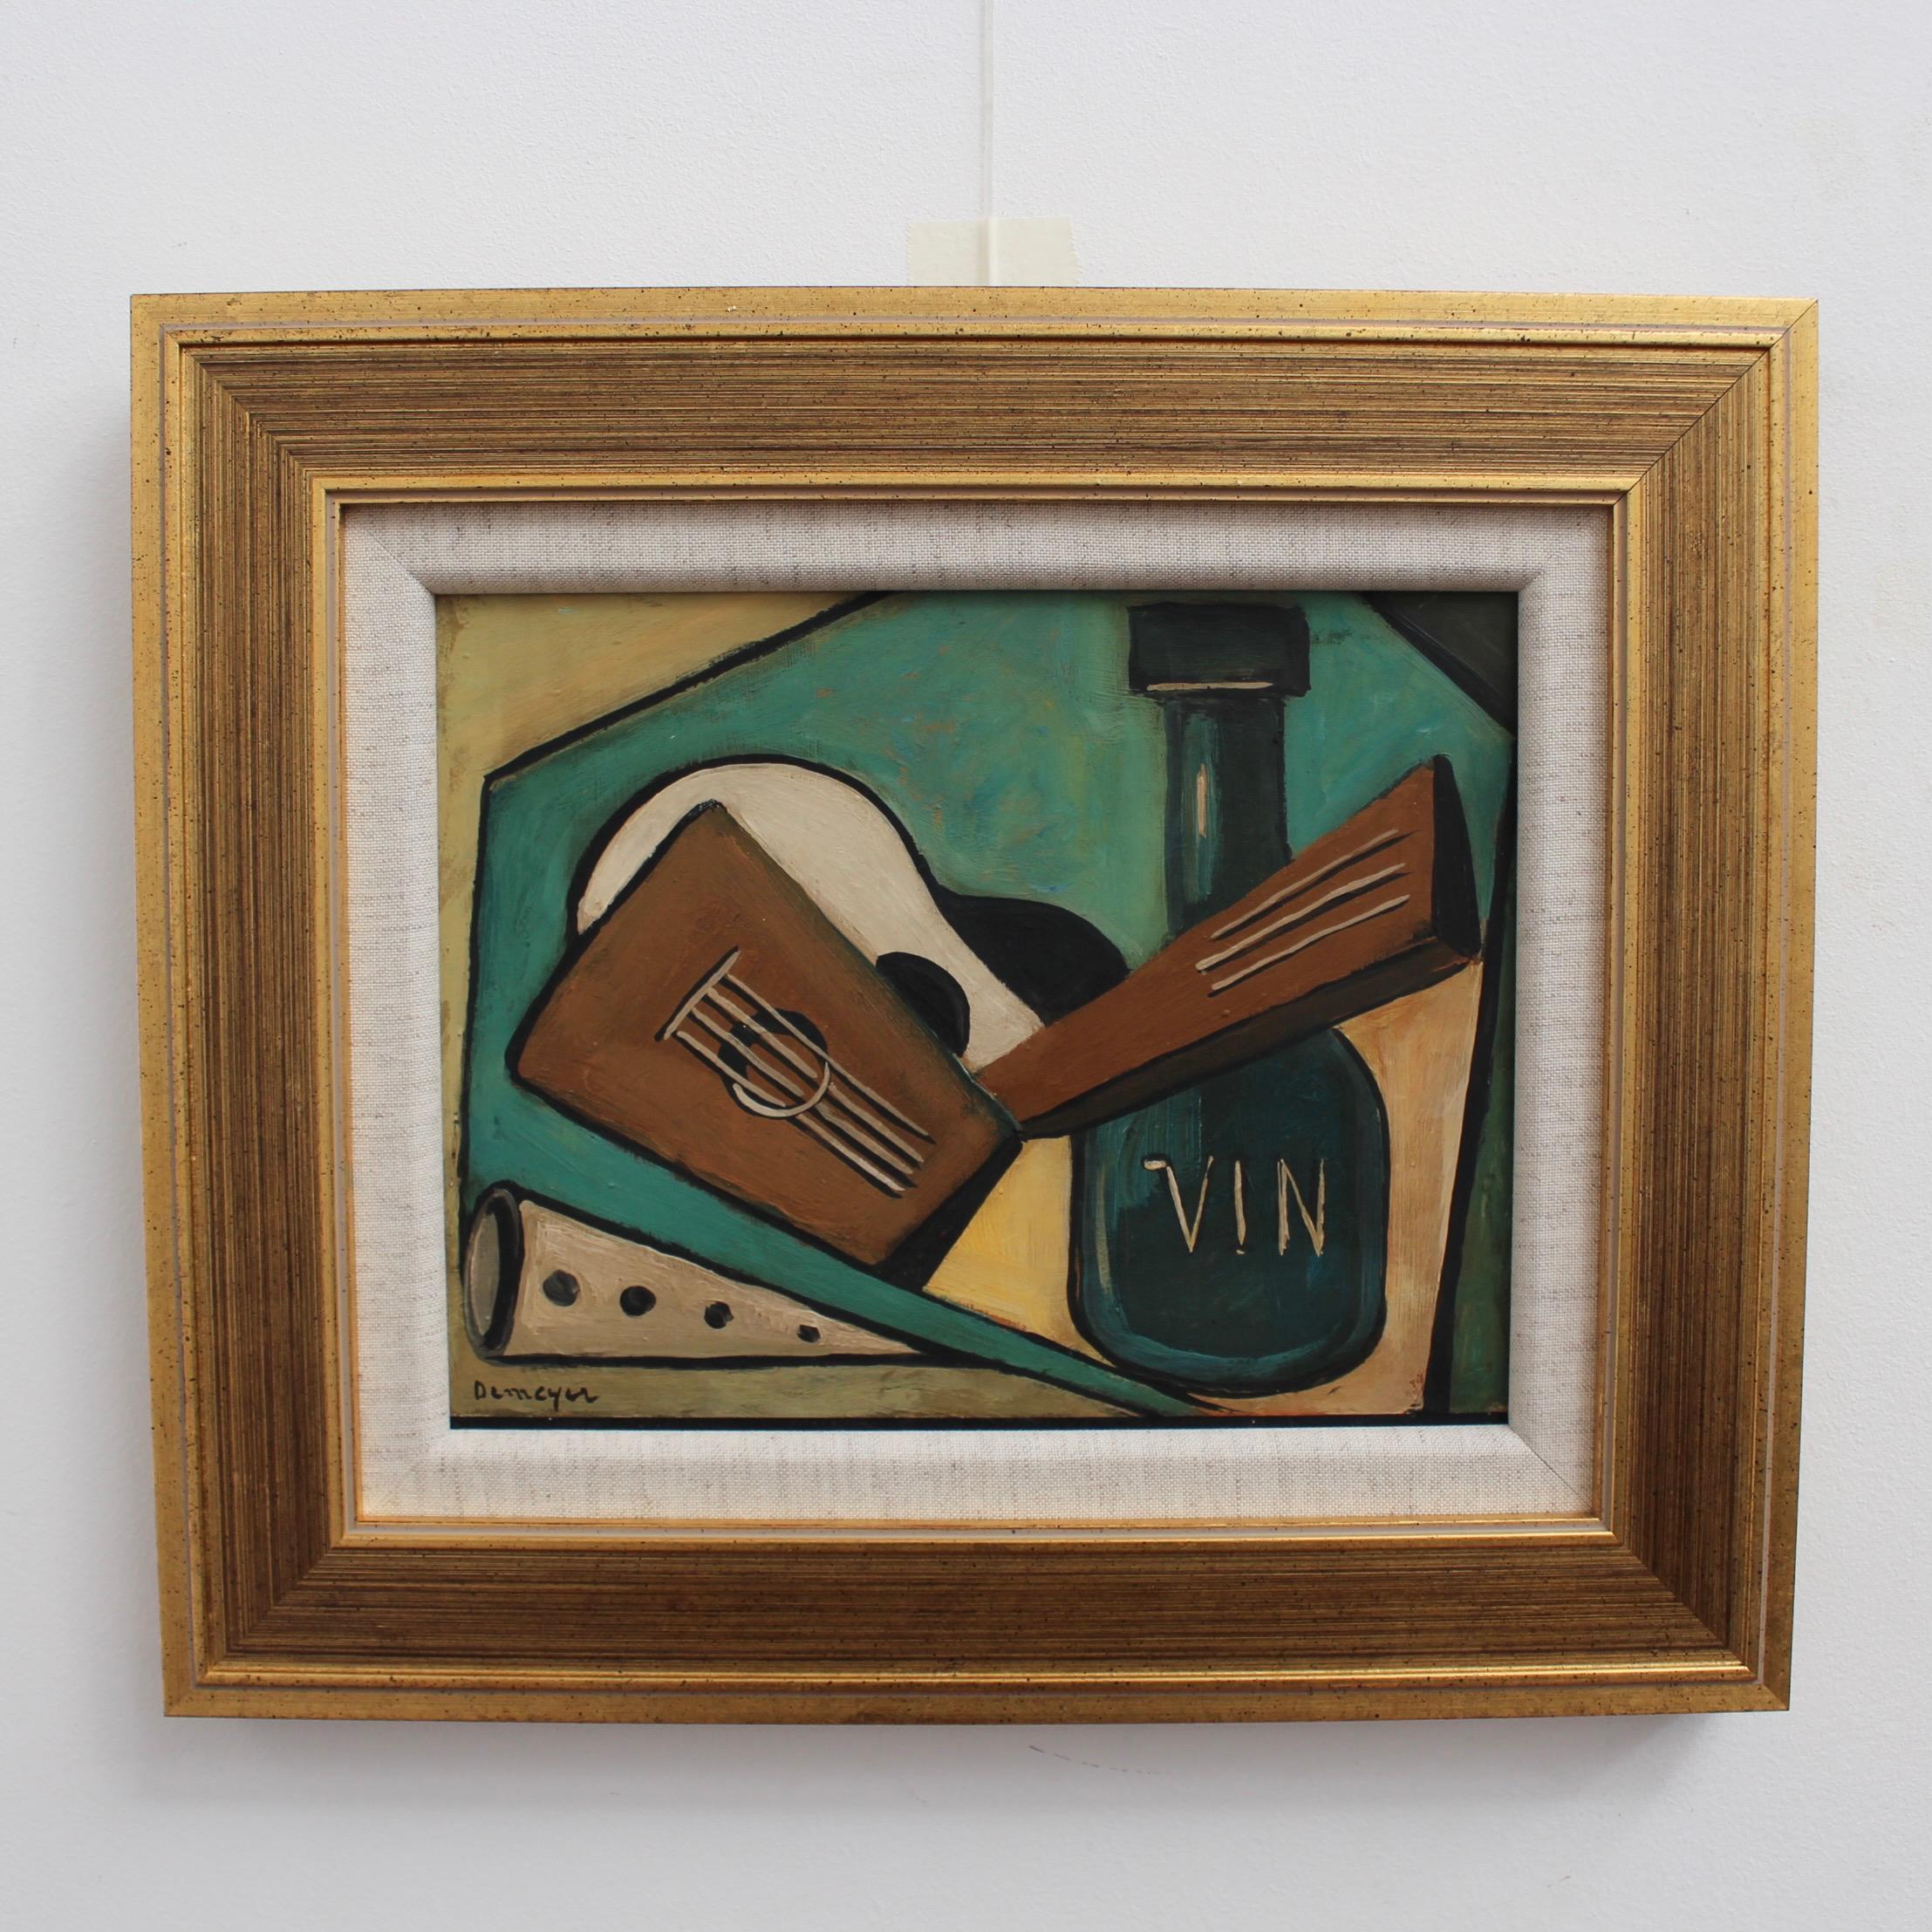 'Still Life with Guitar and Wine' Berlin School - Painting by Unknown